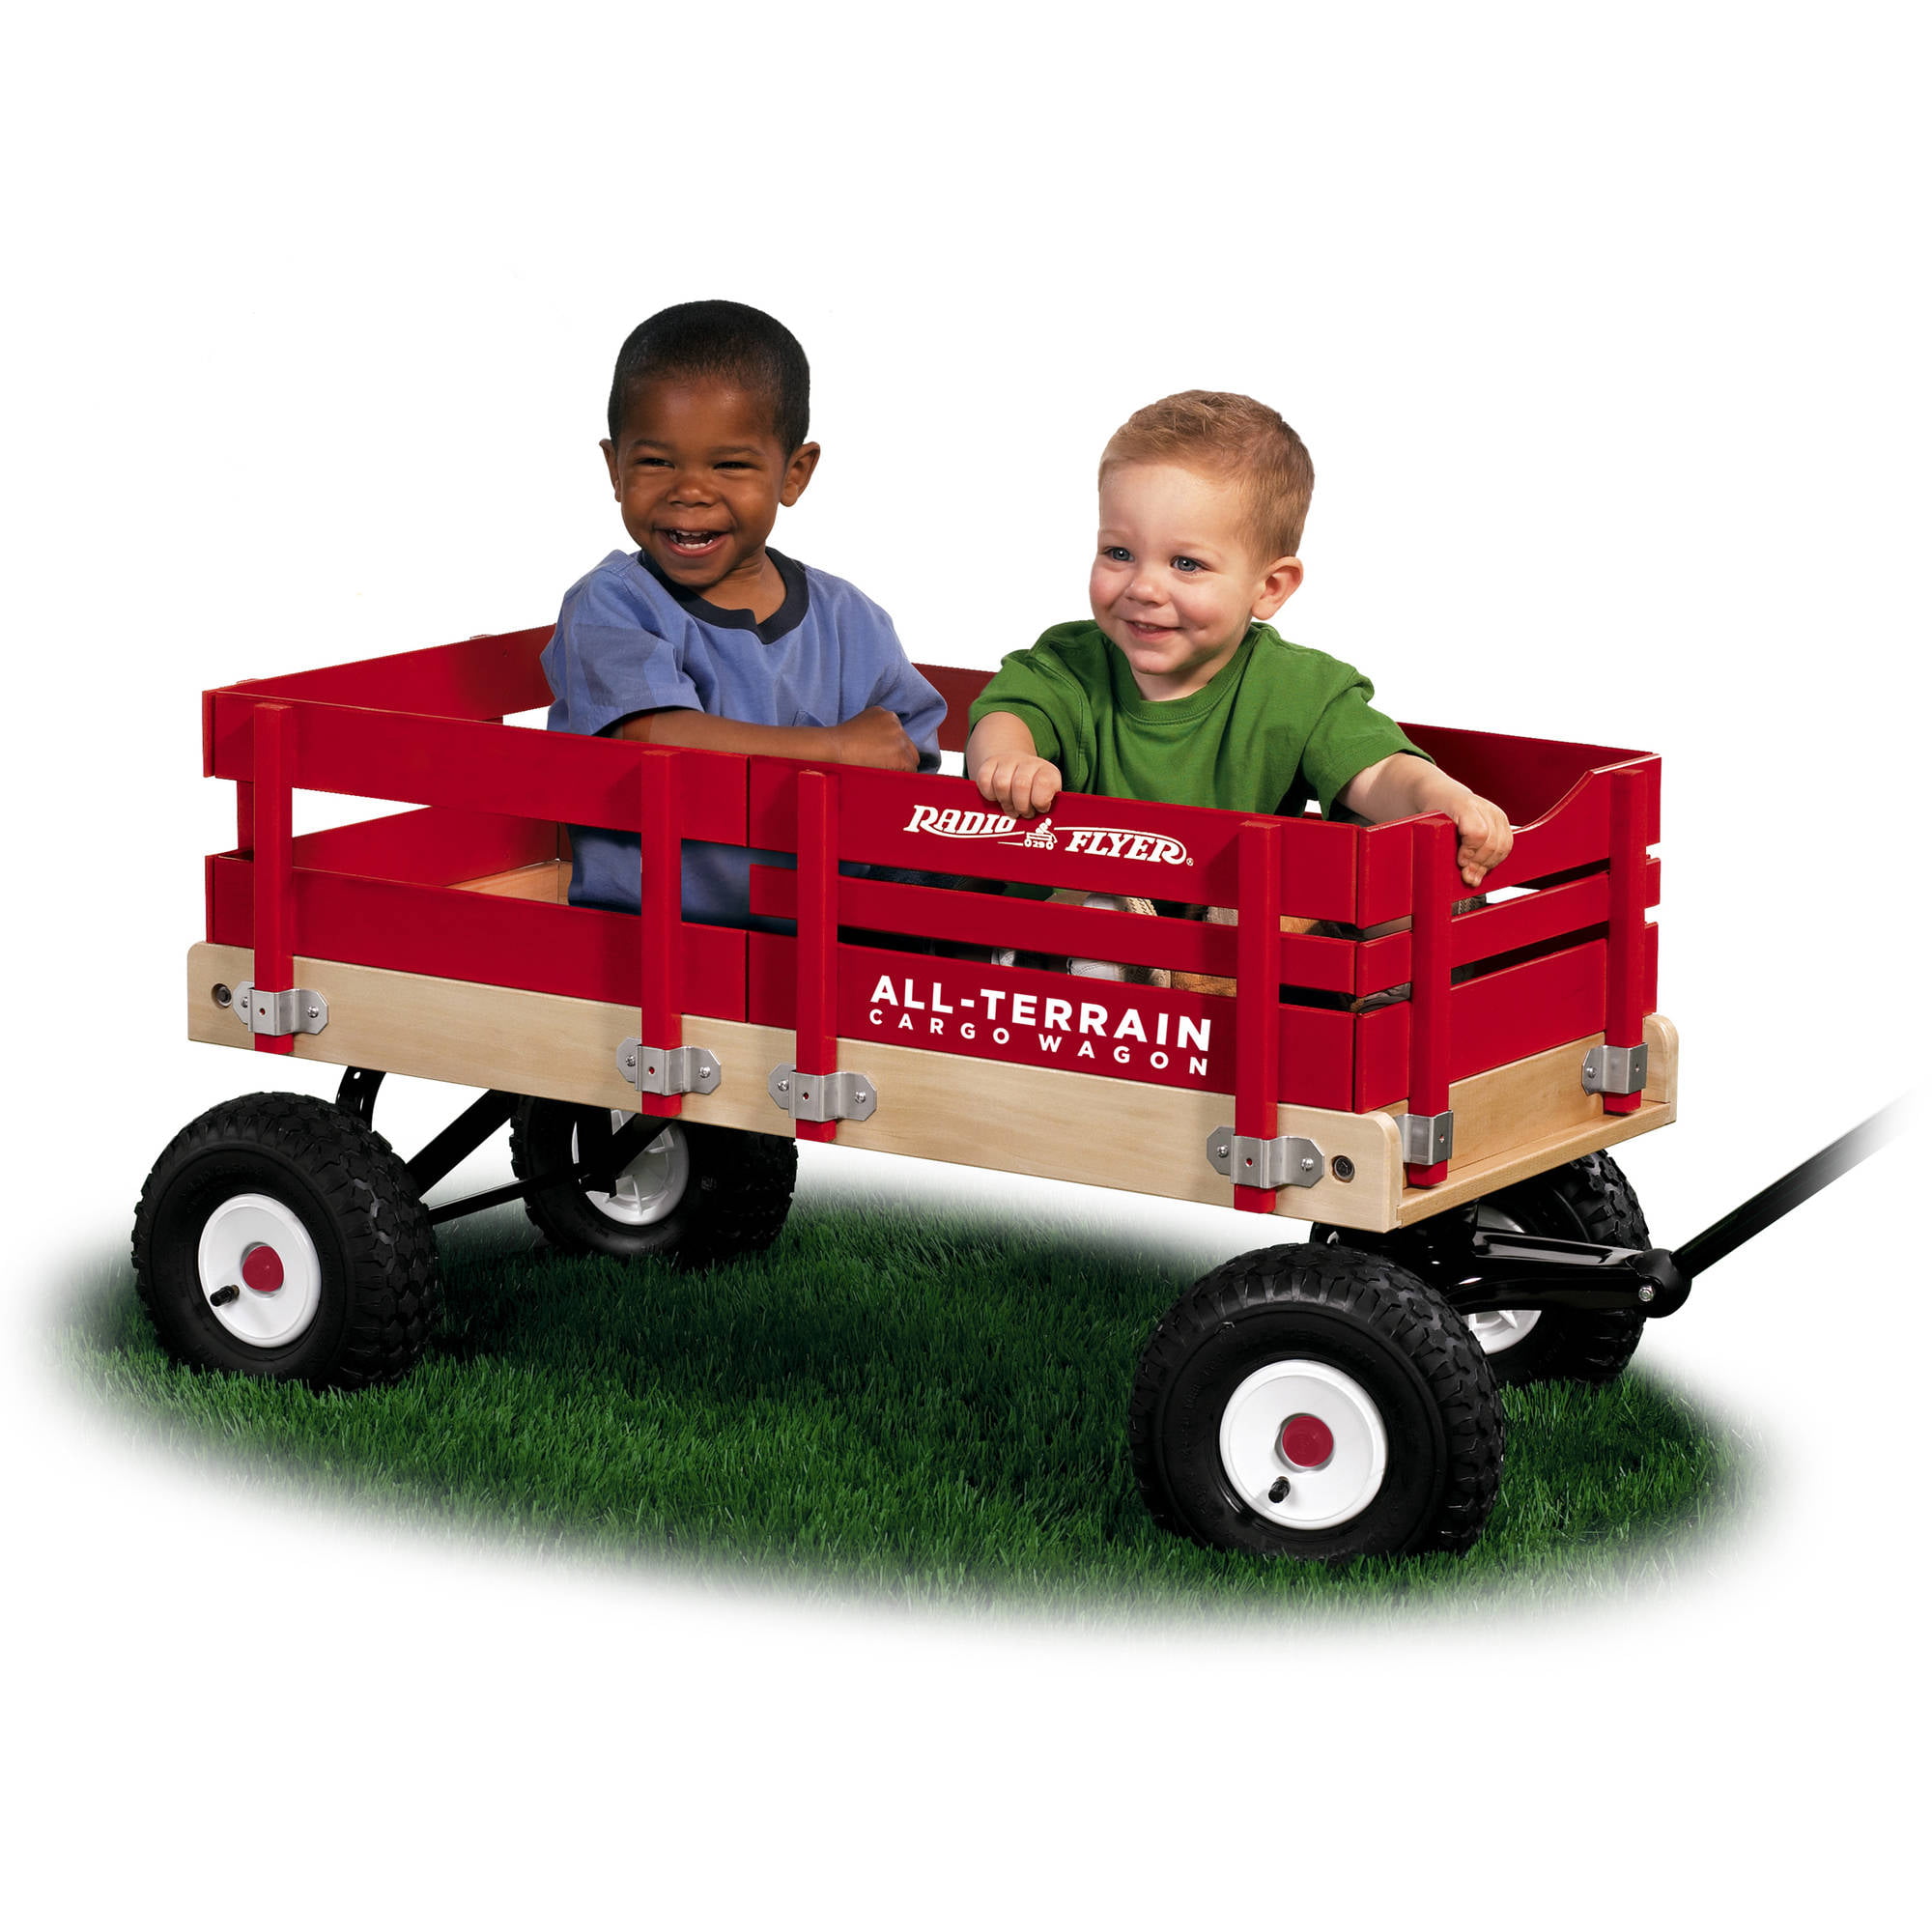 little red wagon with wooden sides